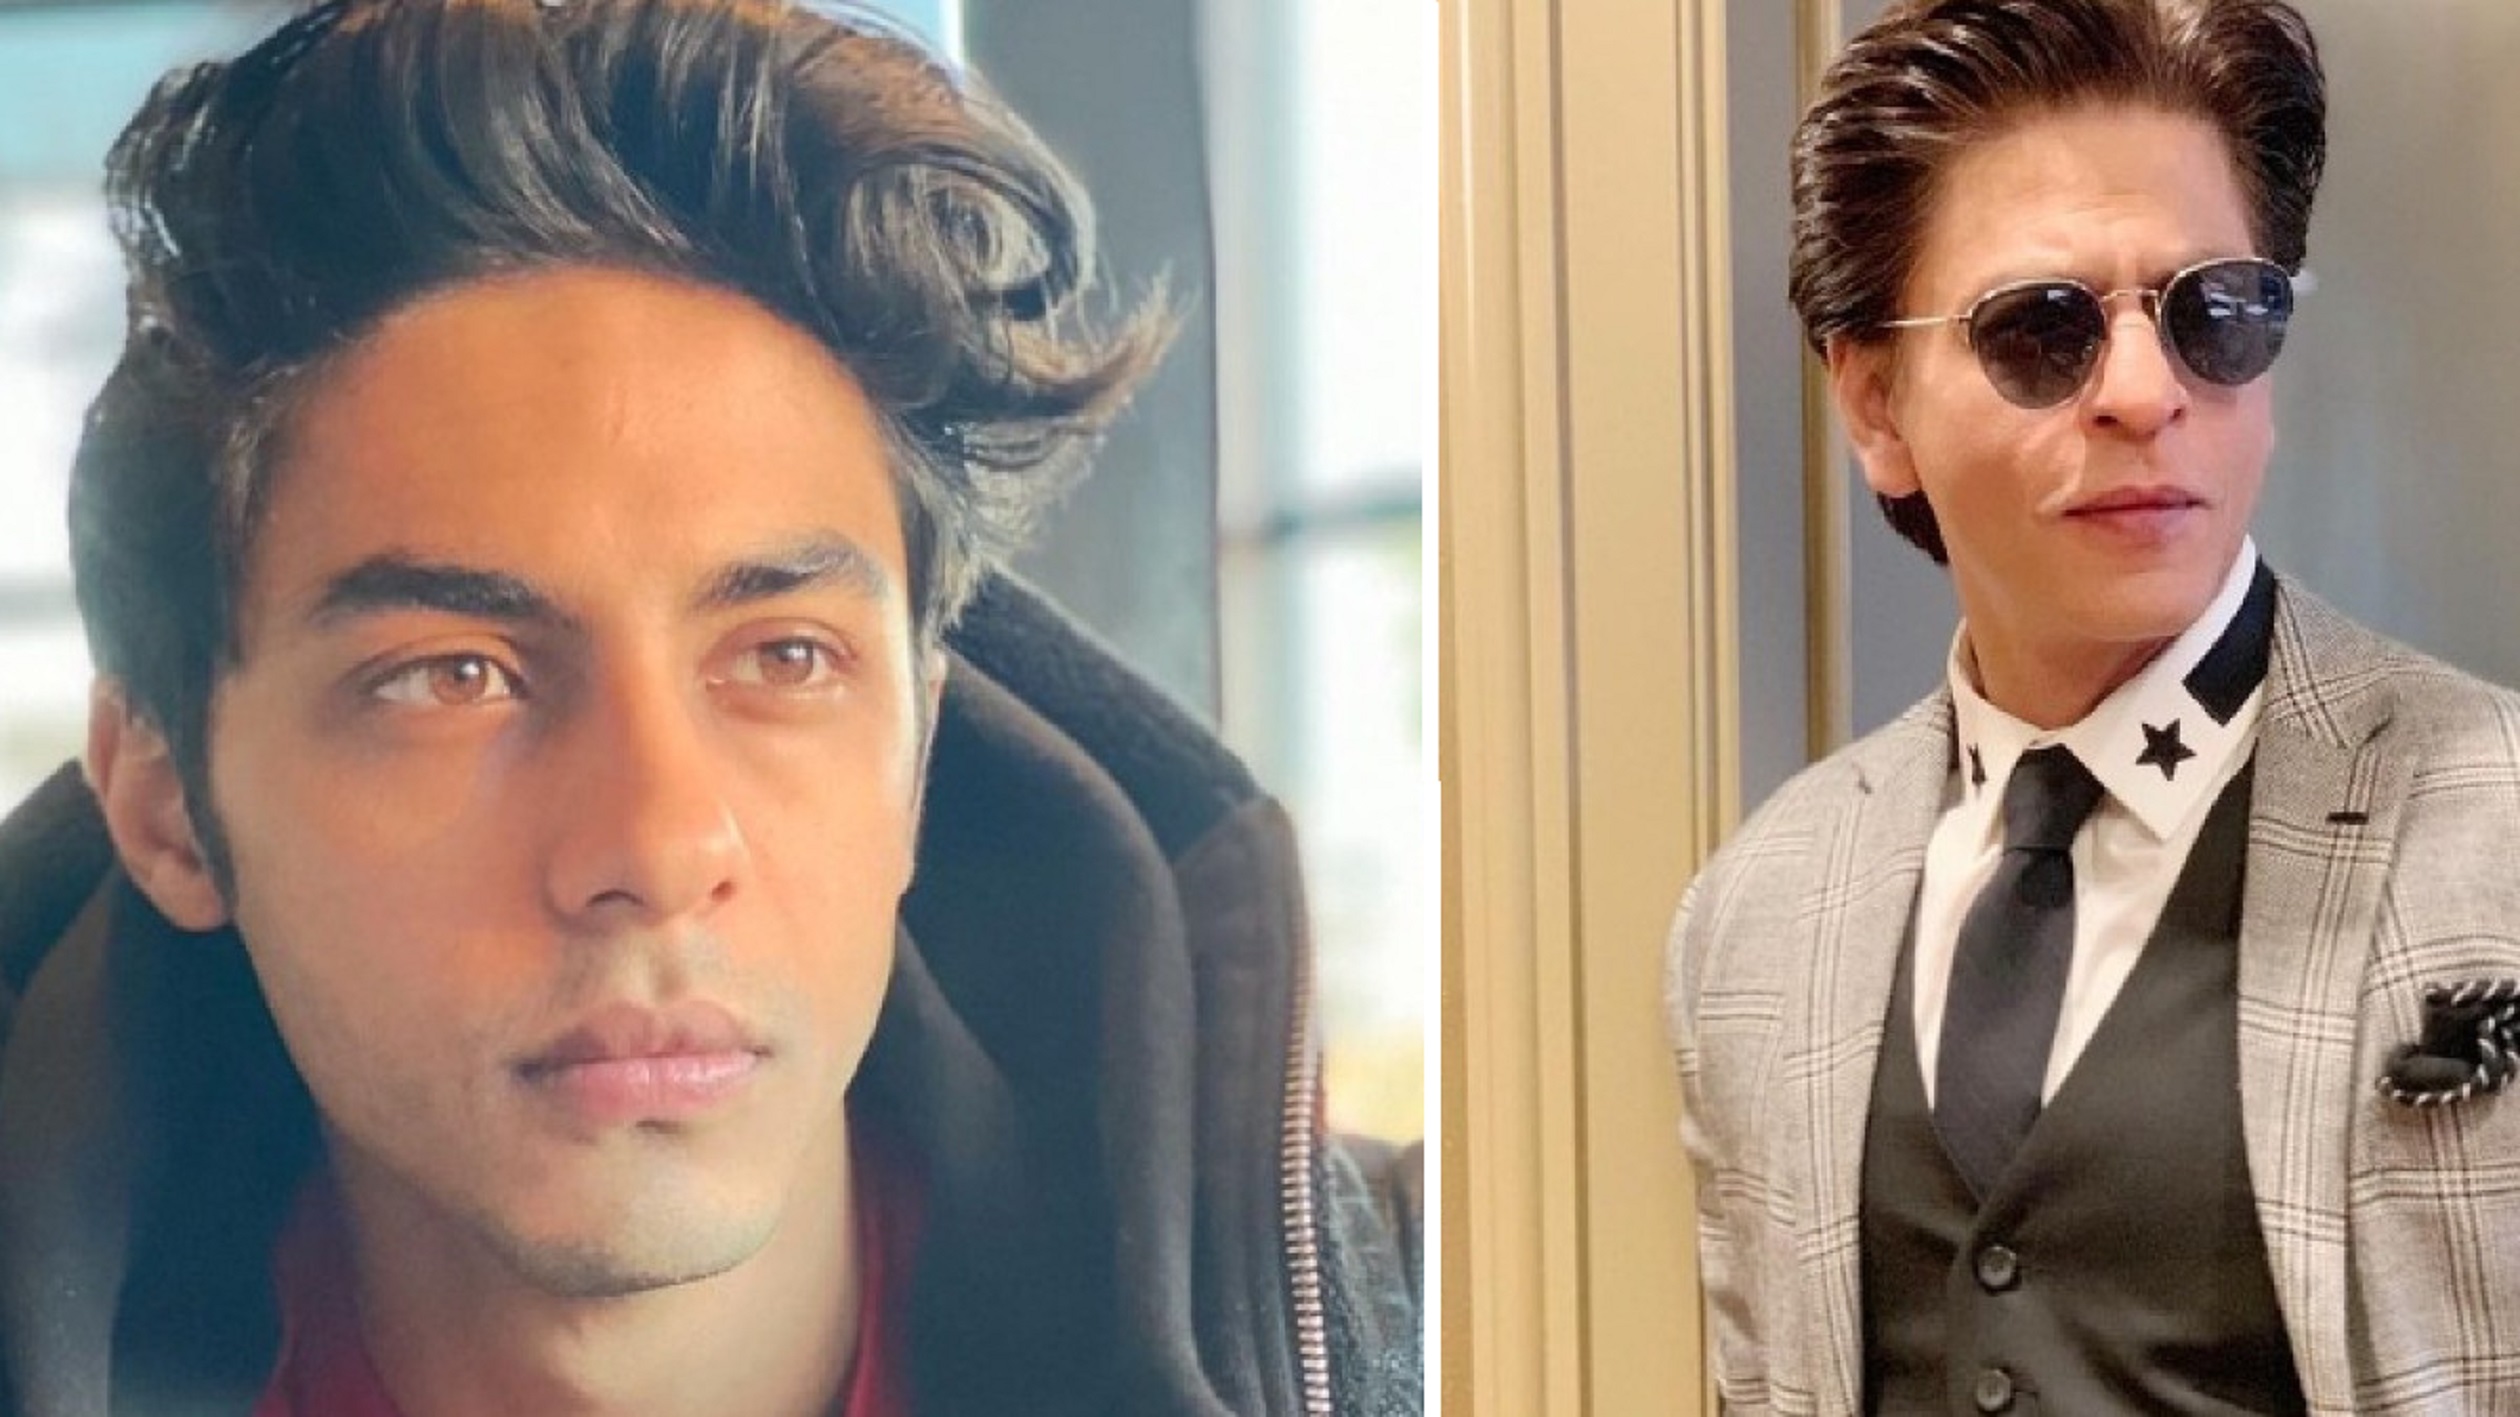 Aryan Khan To Enter Bollywood: Will Make His Debut Soon With Father Shahrukh Khan’s Production